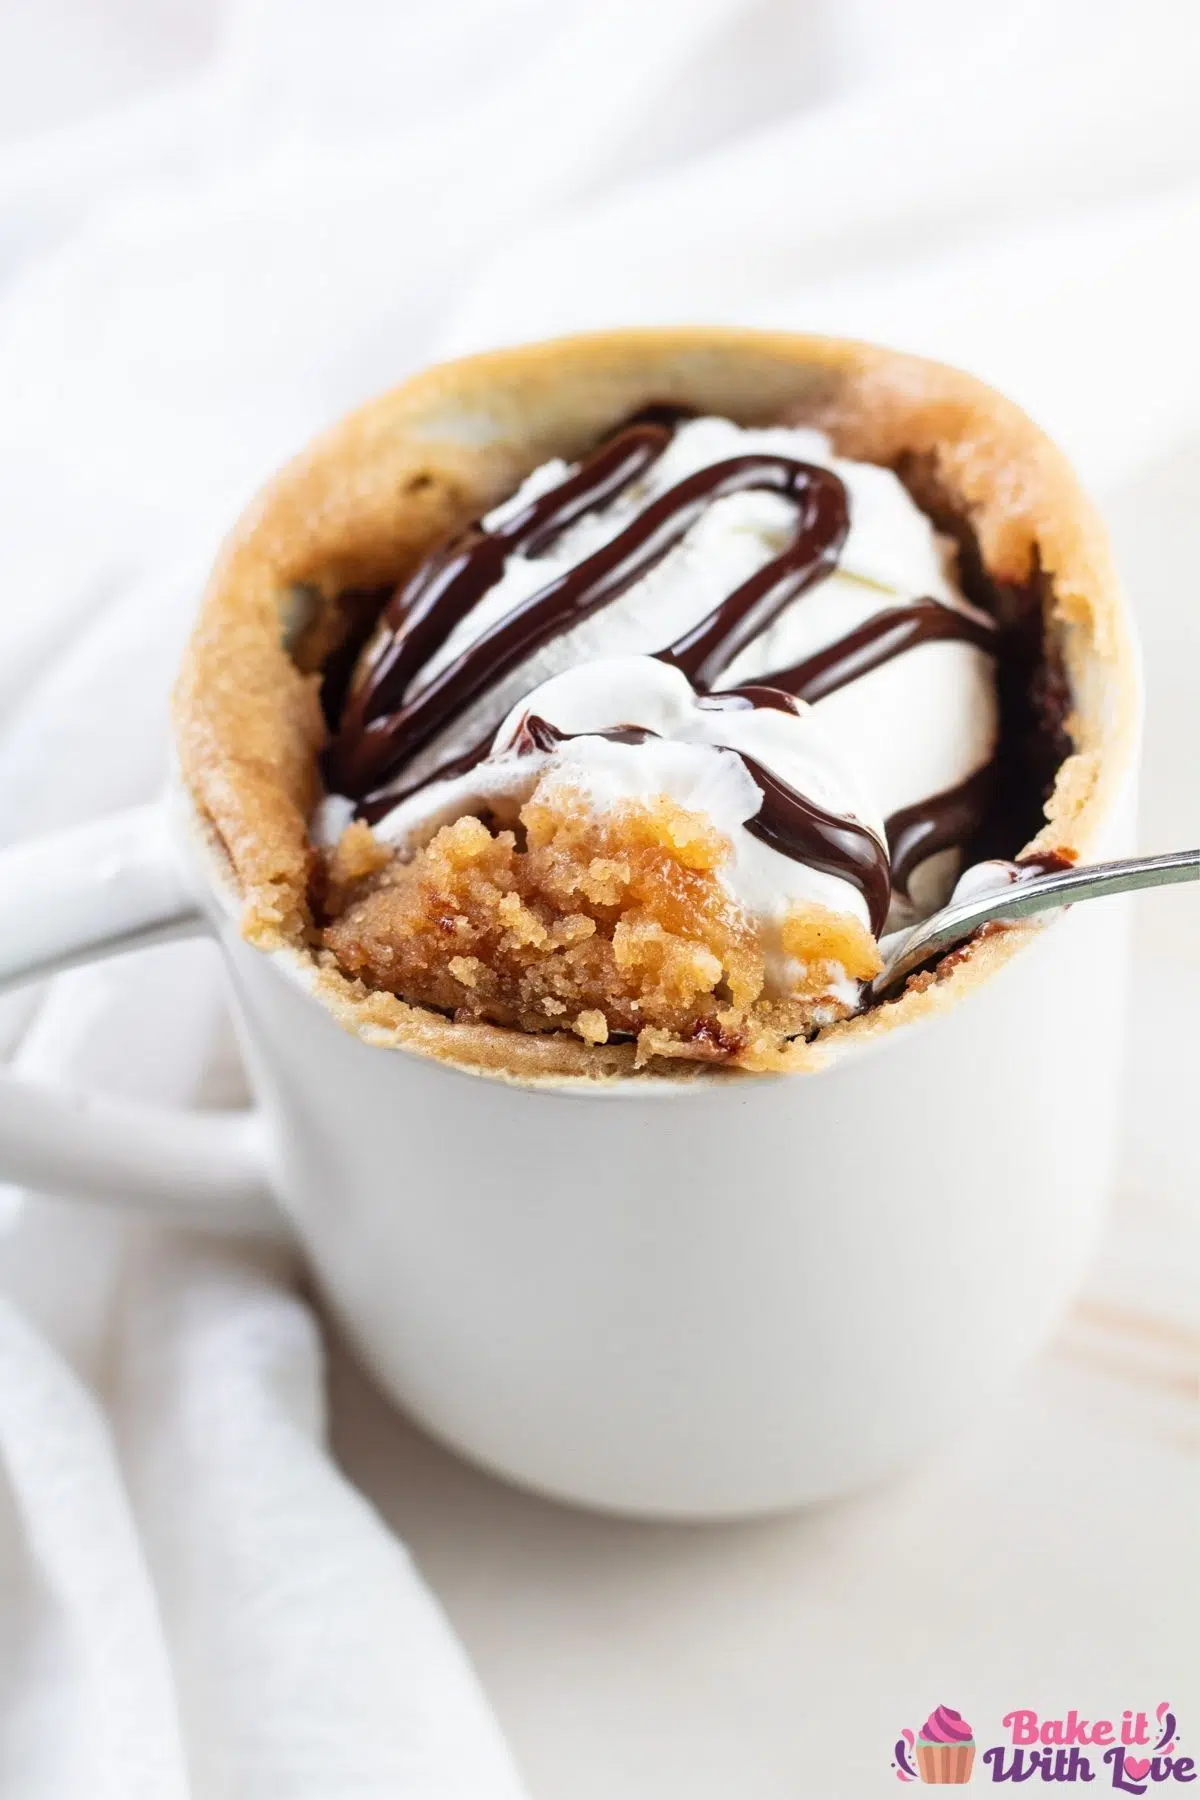 Tall view of the peanut butter mug cake topped with whipped cream and chocolate sauce.